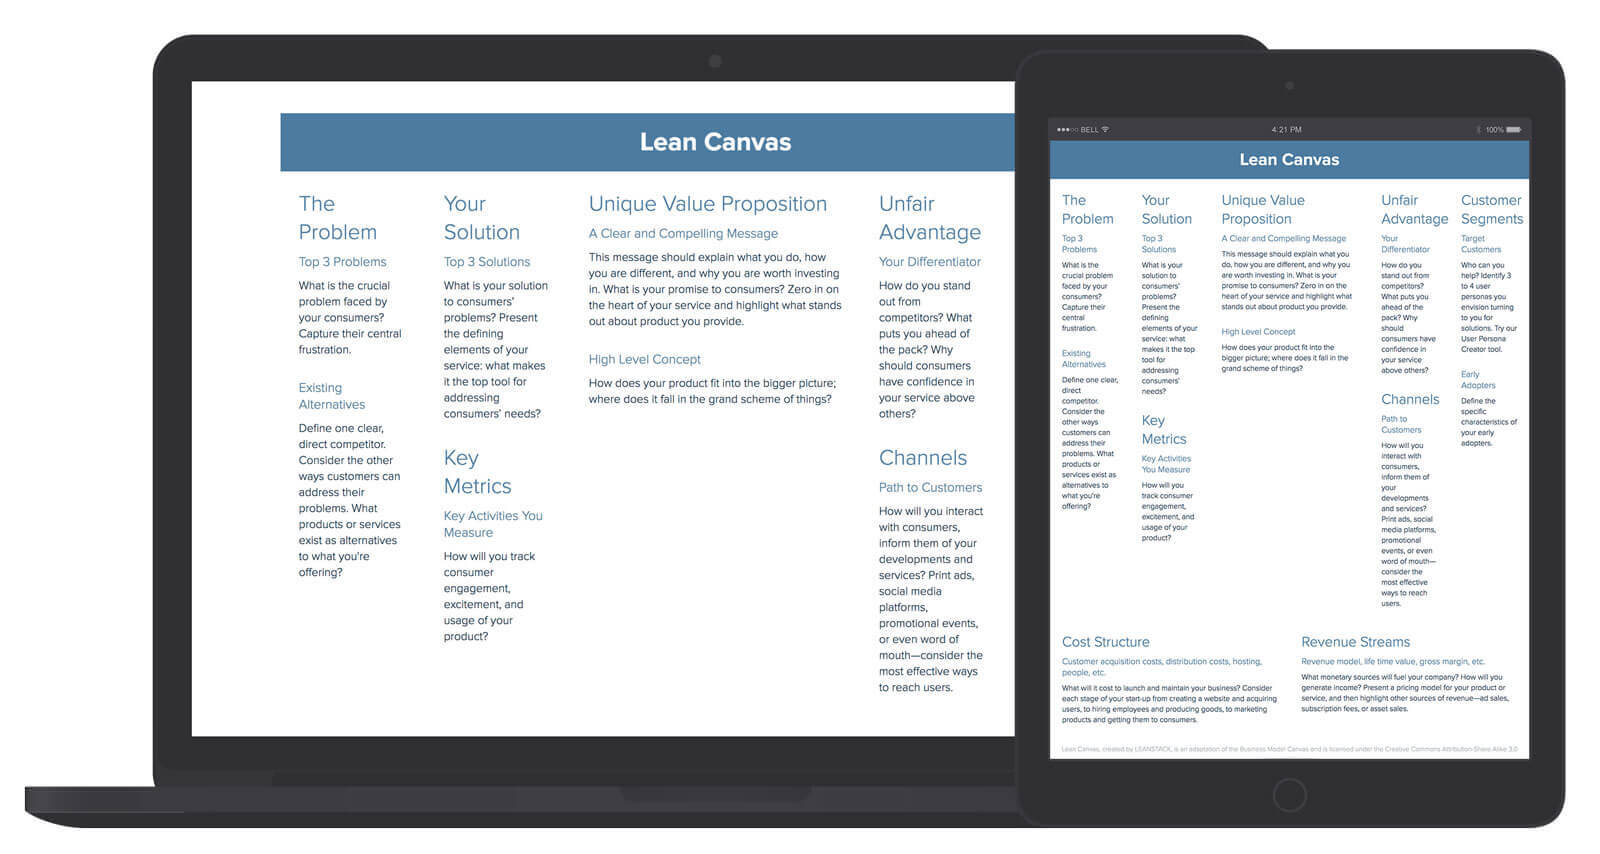 Lean Canvas Template And Examples | Xtensio Inside Lean Canvas Word Template